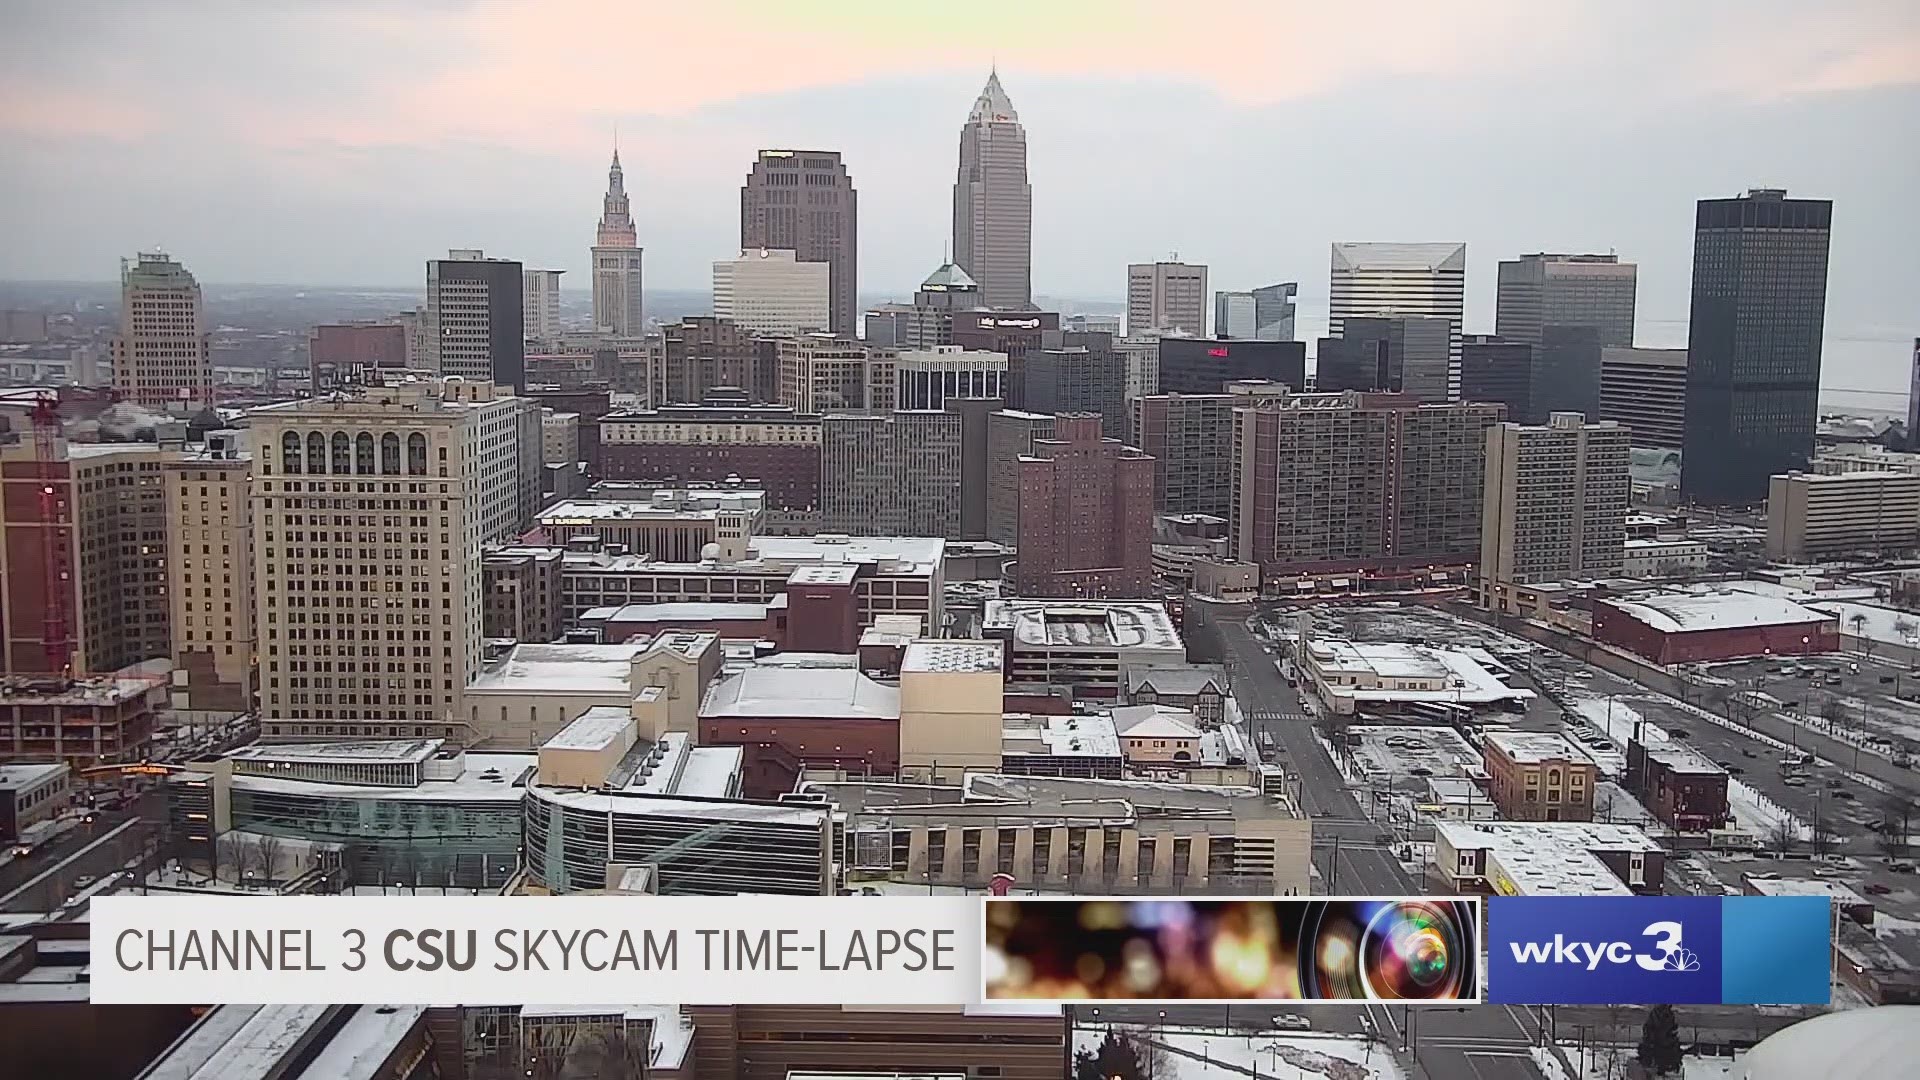 Thursday was a mostly cloudy, but dry day, across northern Ohio. Check out our all day weather time-lapse from the Channel 3 CSU Skycam from sunrise to 5 pm. #3weather